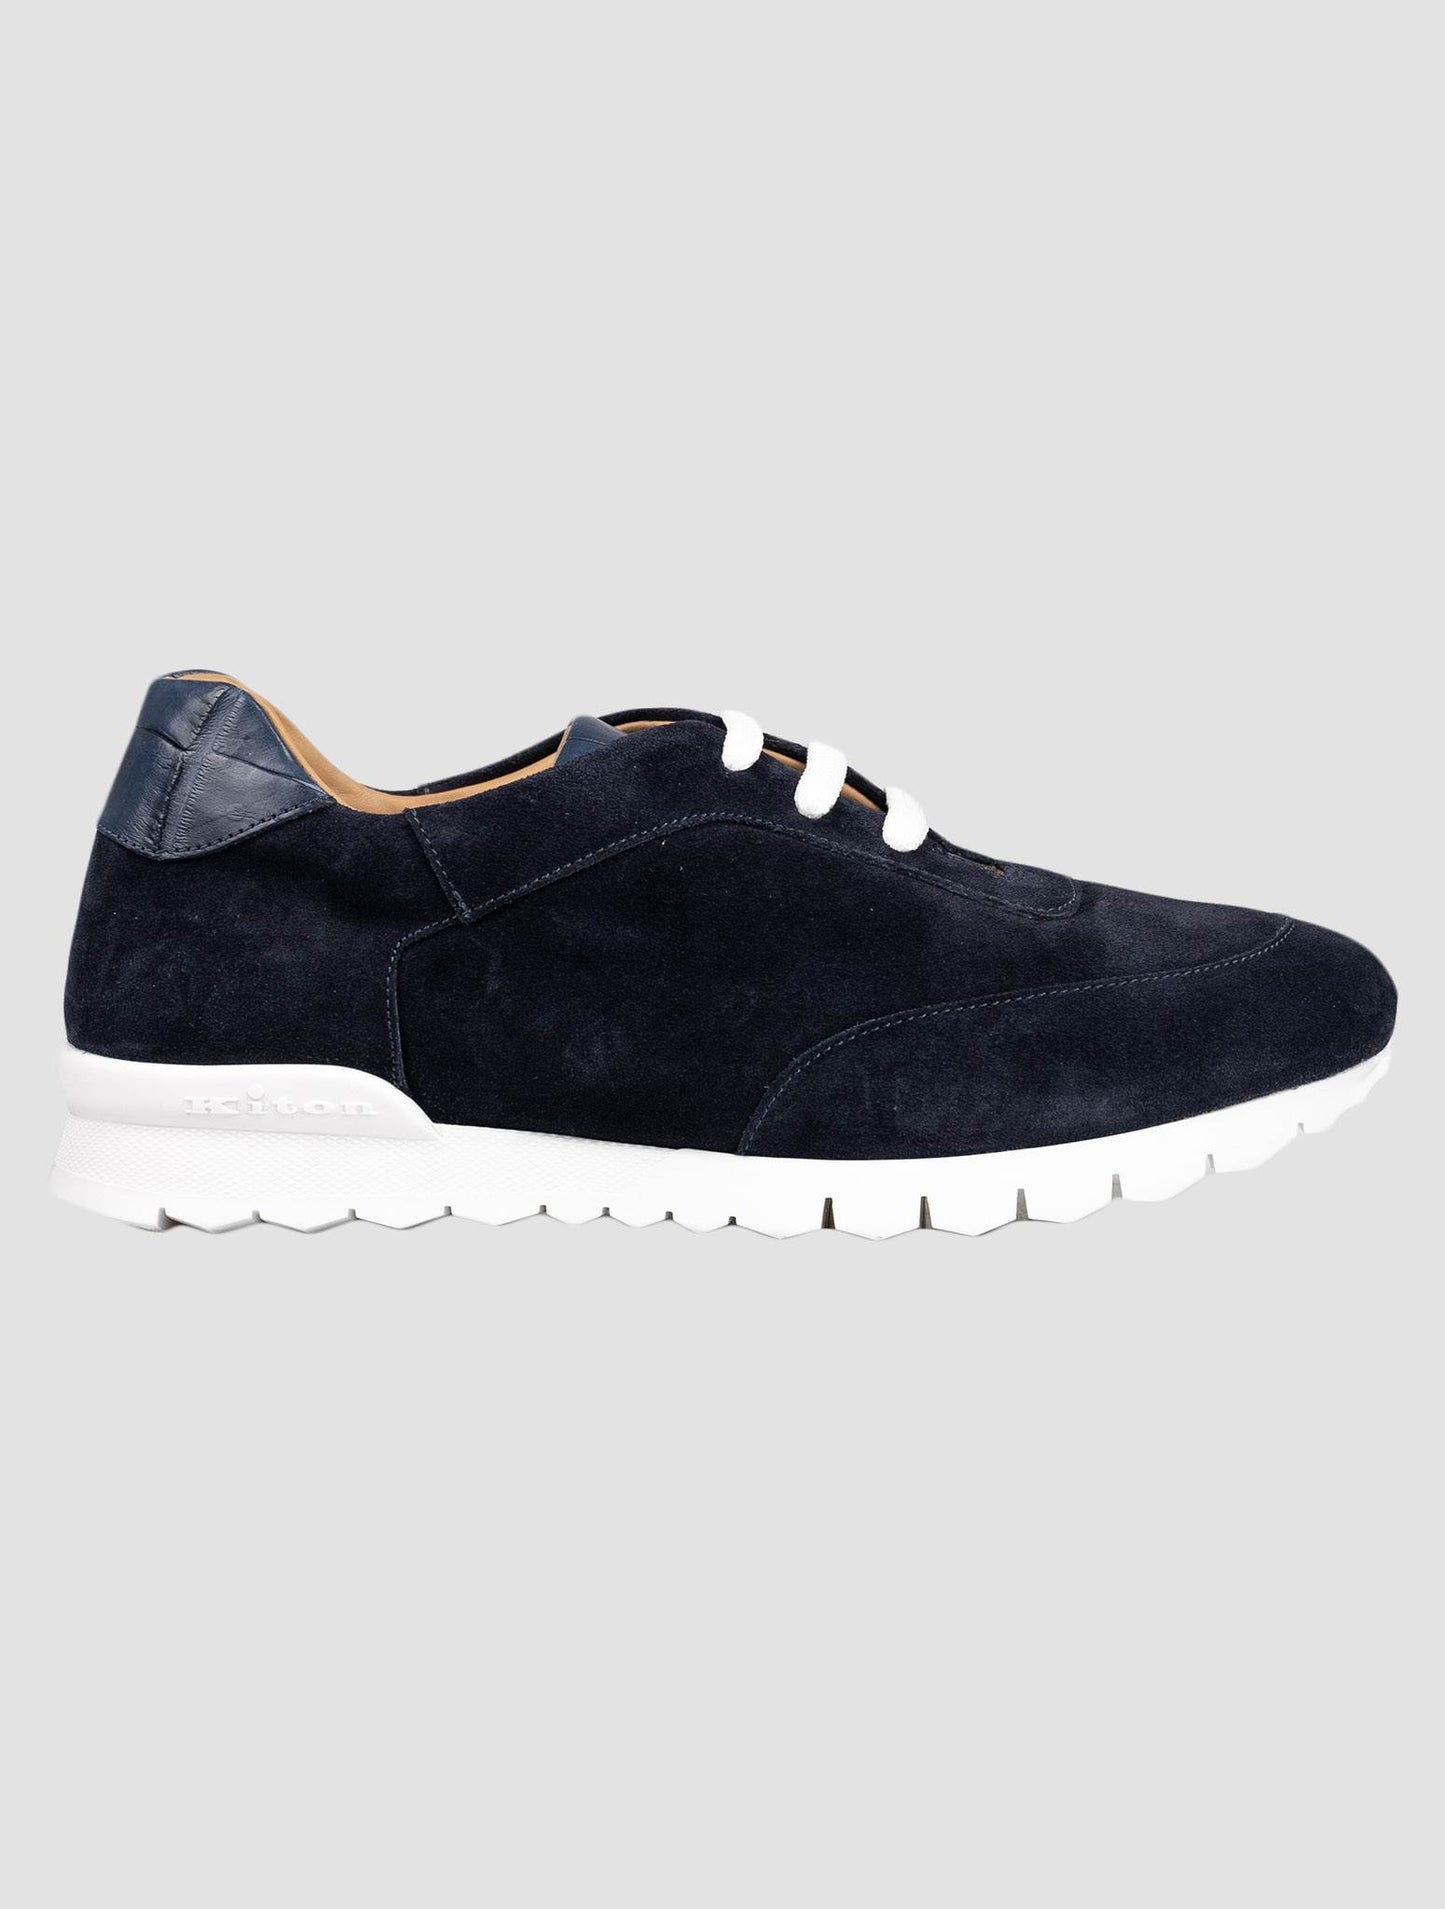 Kiton Blue Leather Suede Leather Crocodile Sneakers